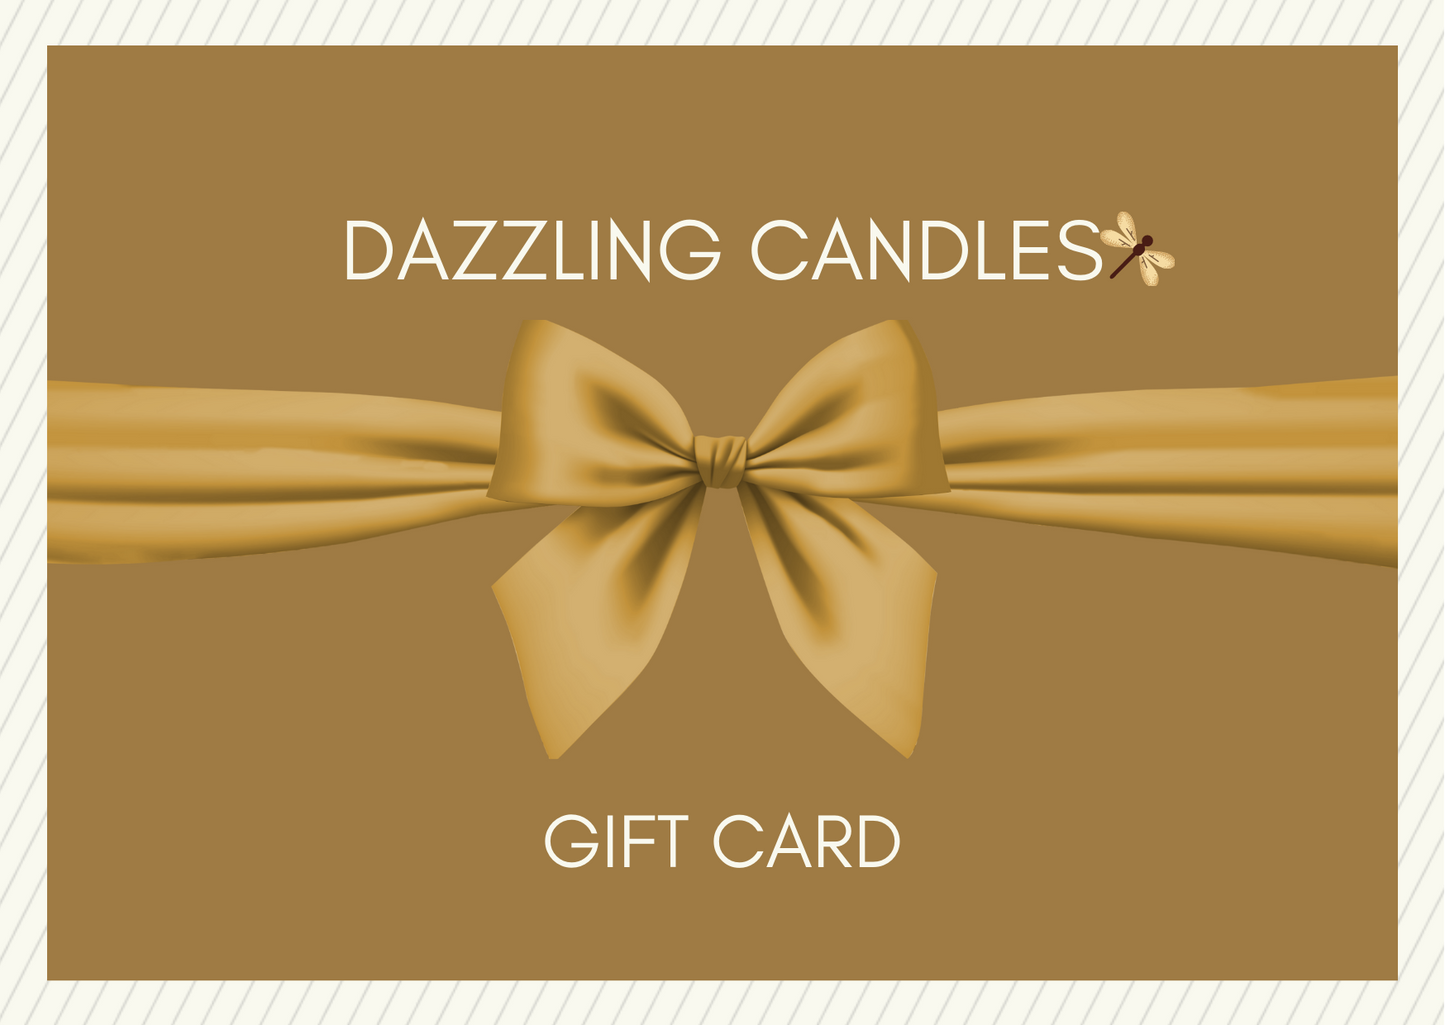 Dazzling Candles Gift Card